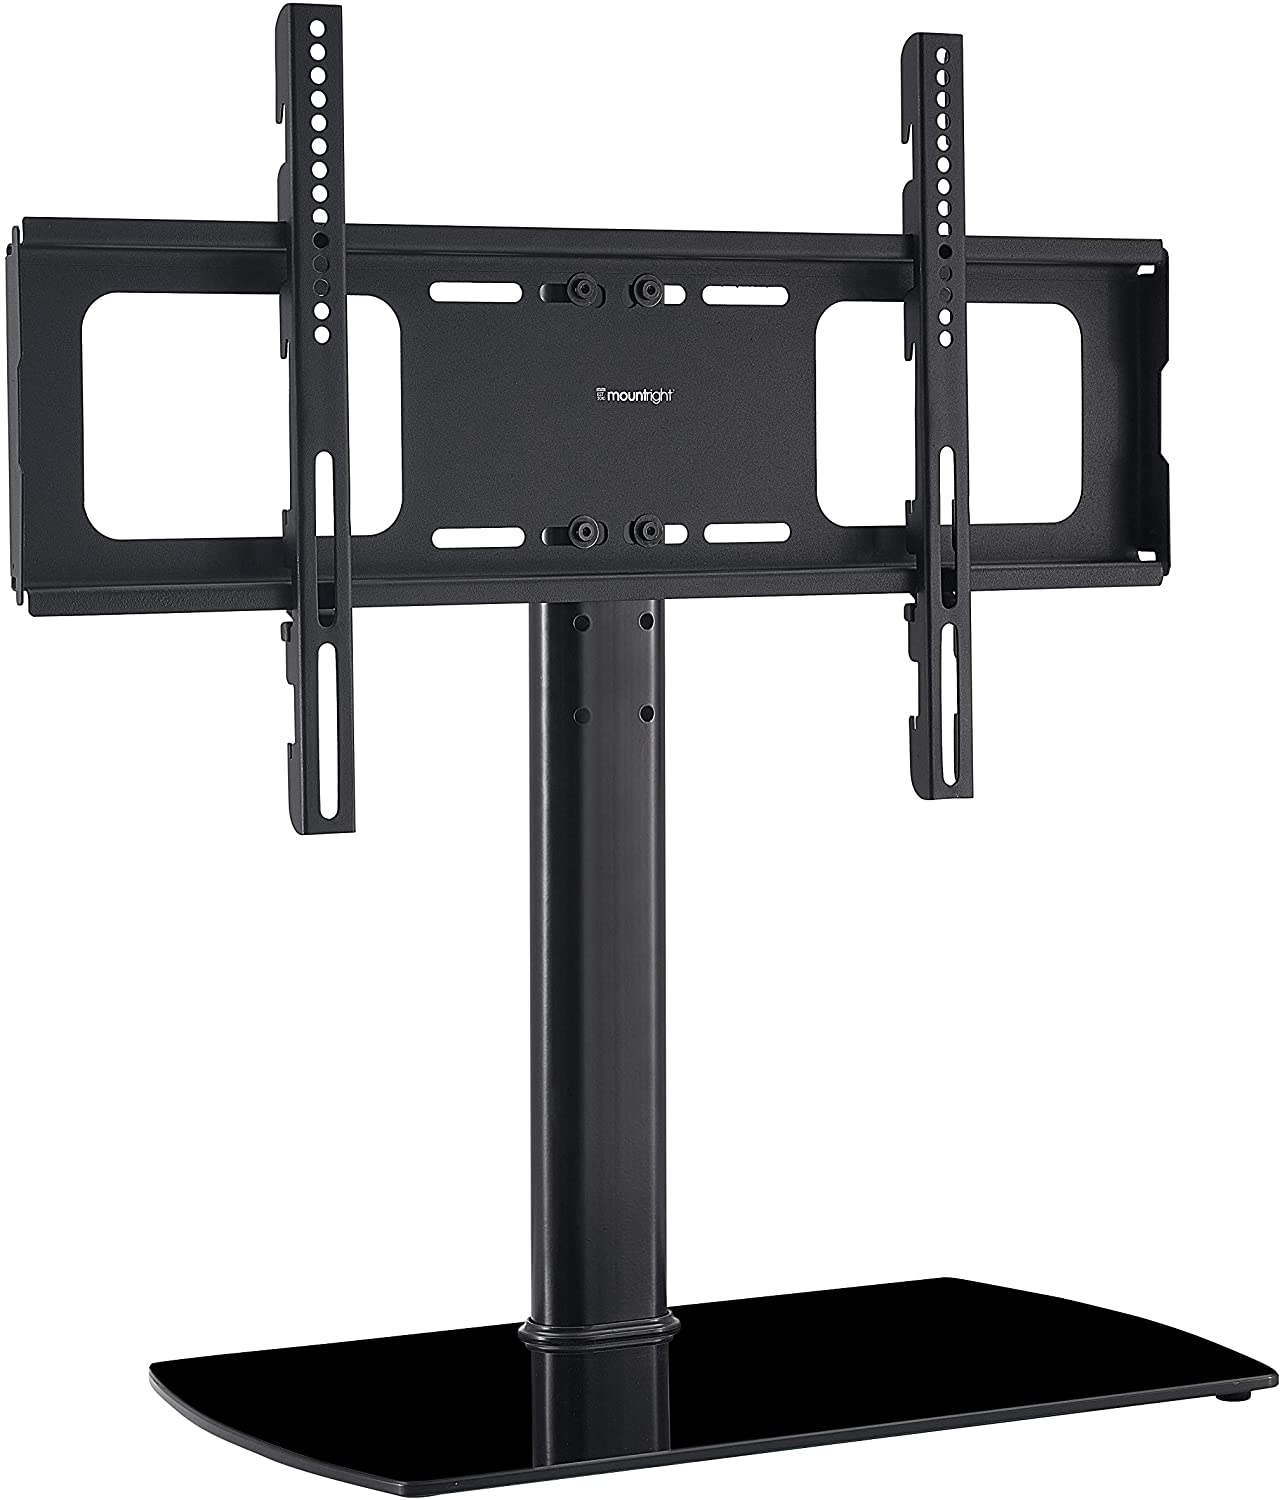 63" for LED LCD Plasma G-VO Universal Table Top TV Pedestal Stand Base fits 22" 